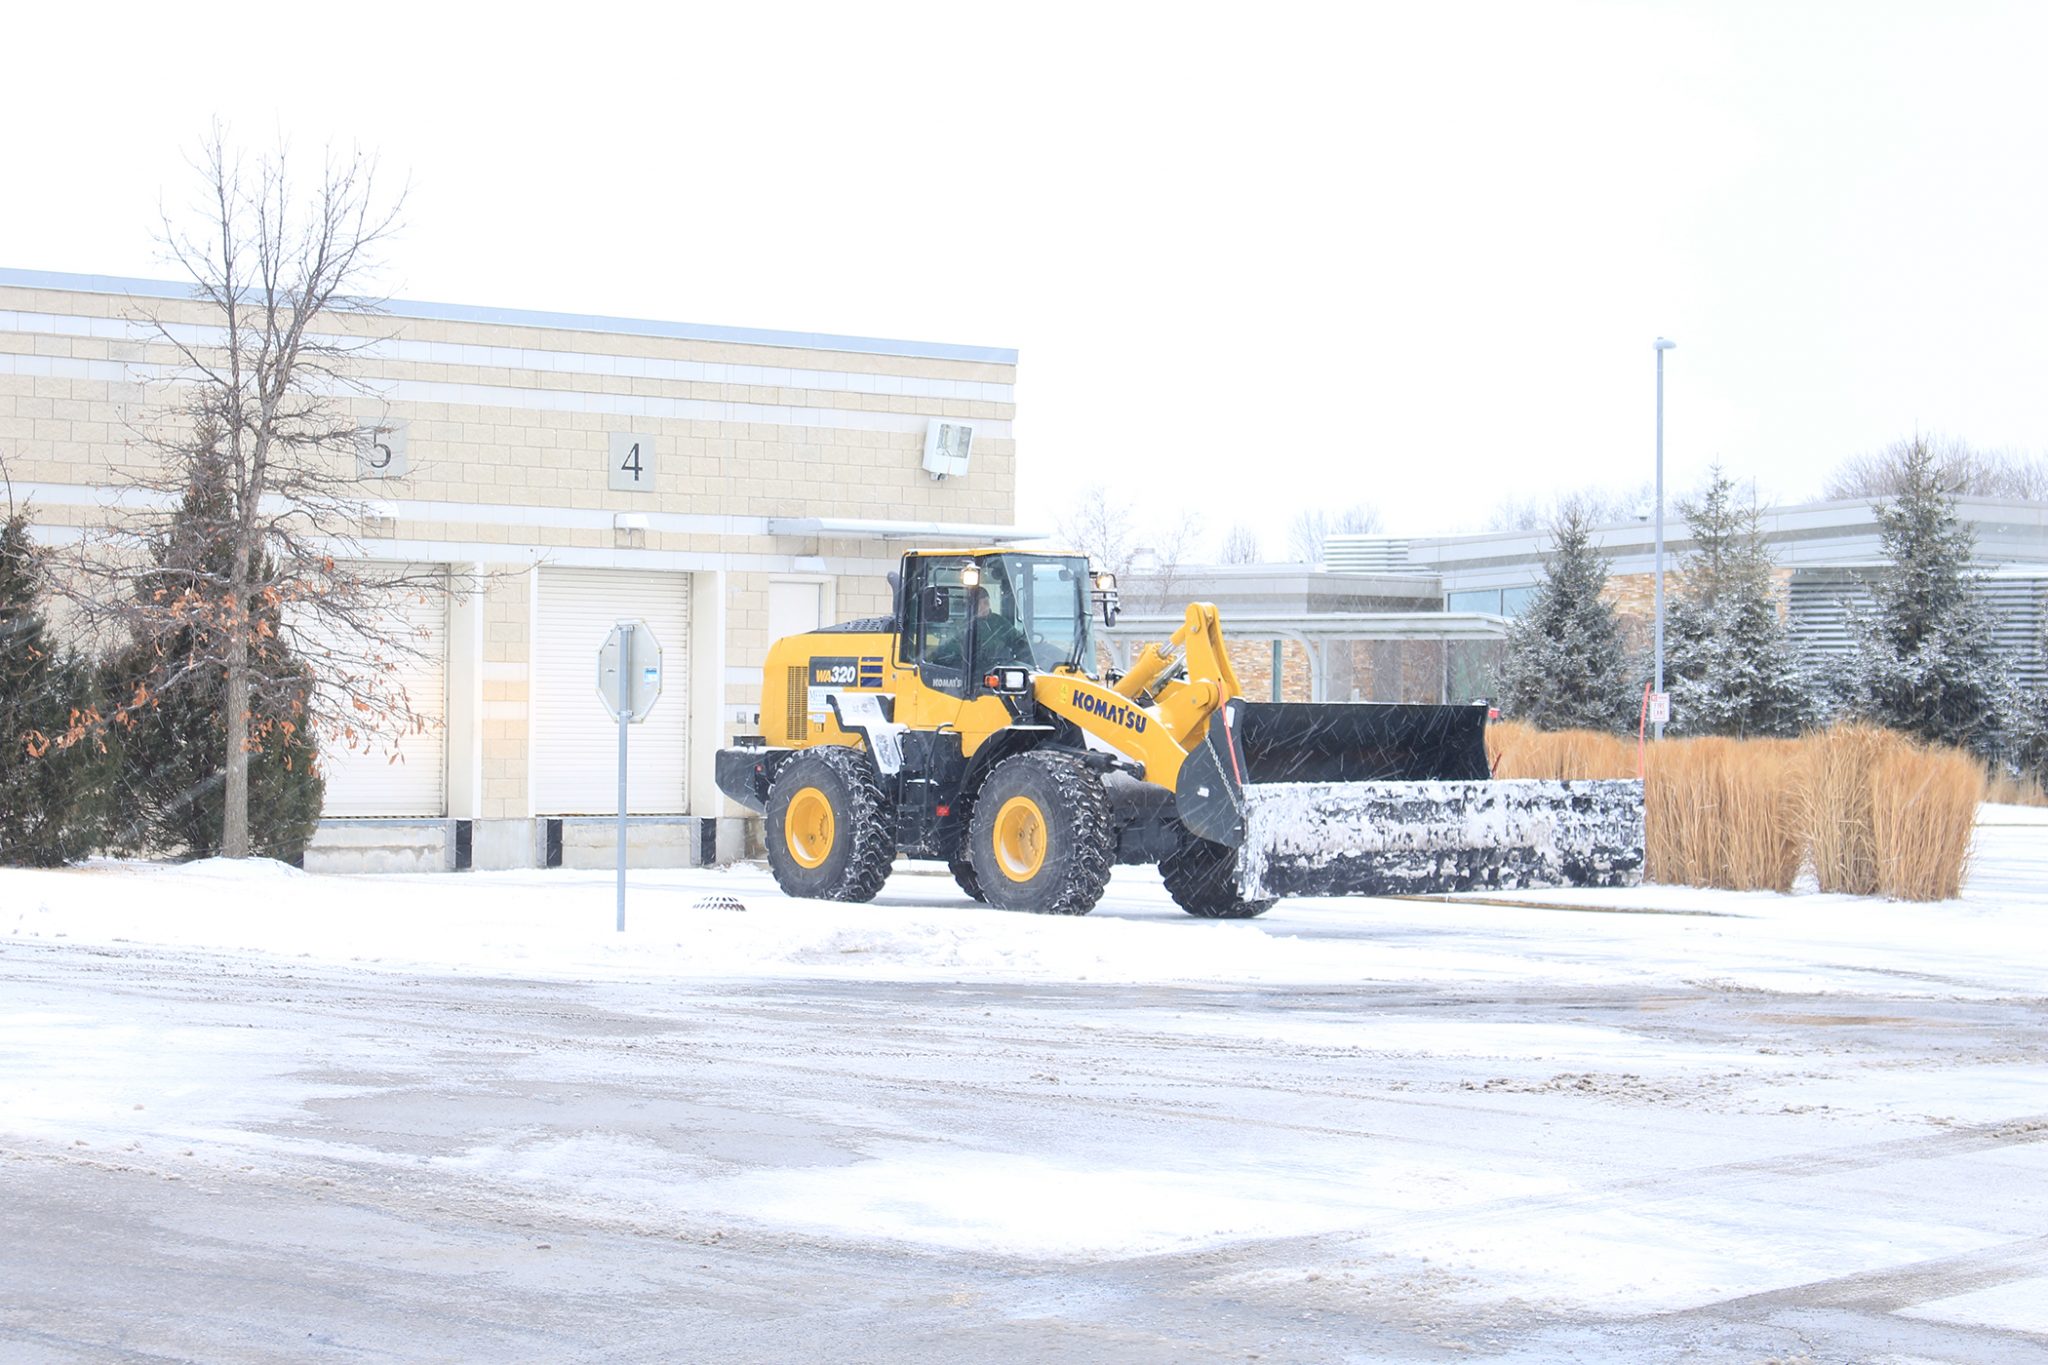 plow equipment working to remove snow from parking lot